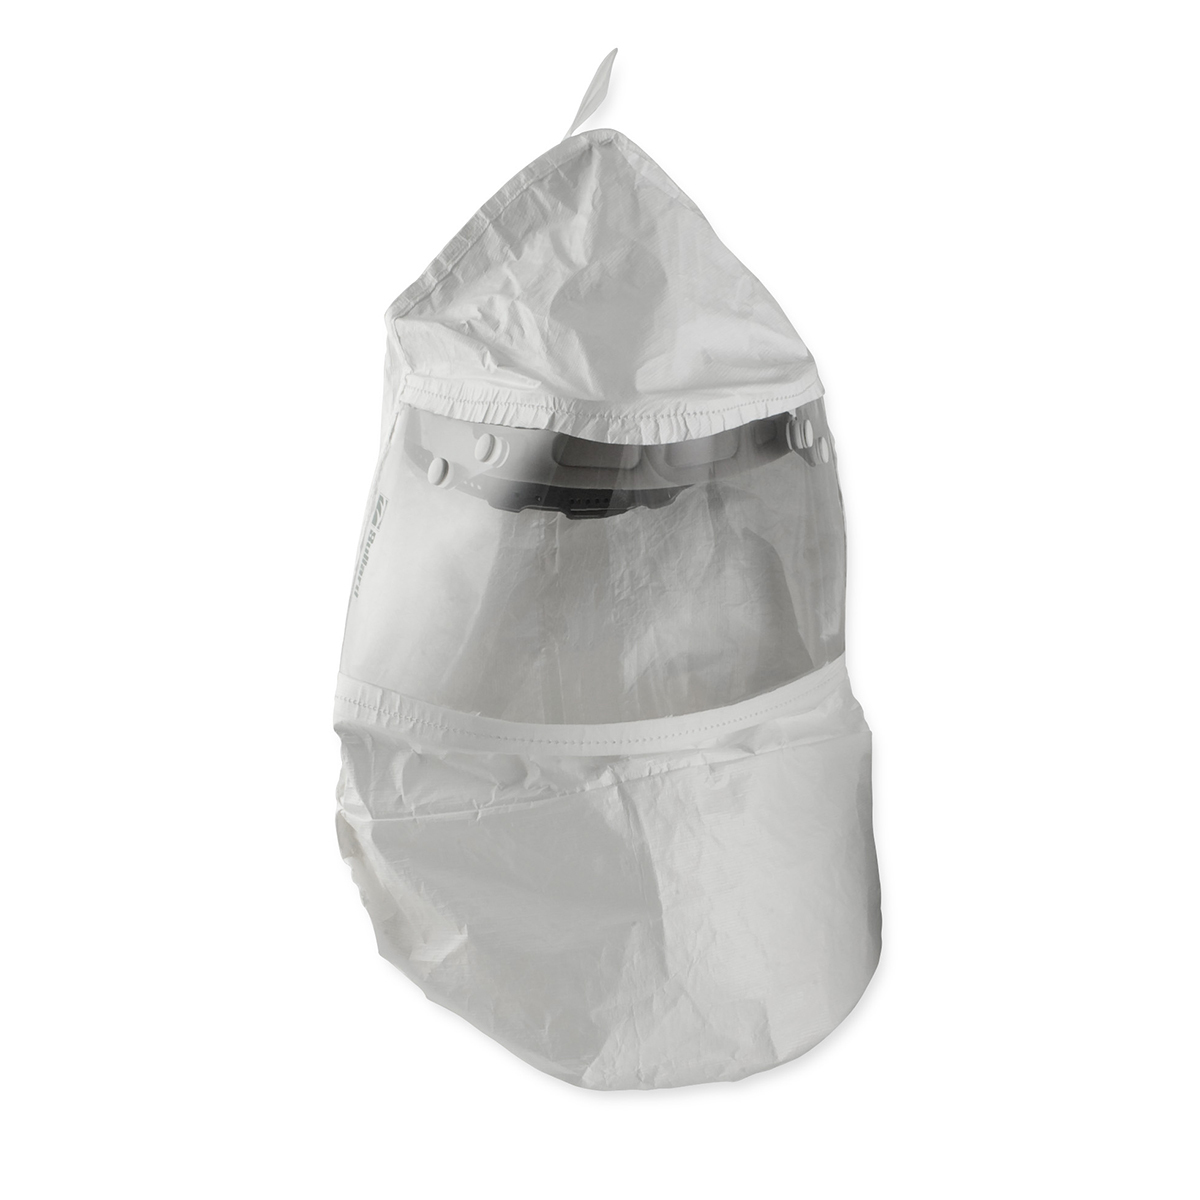 Bullard® Dupont® Tychem® 2000 Single Bib 25 APF Loose Fitting Hood For Supplied Air/PAPR (Availability restrictions apply.)